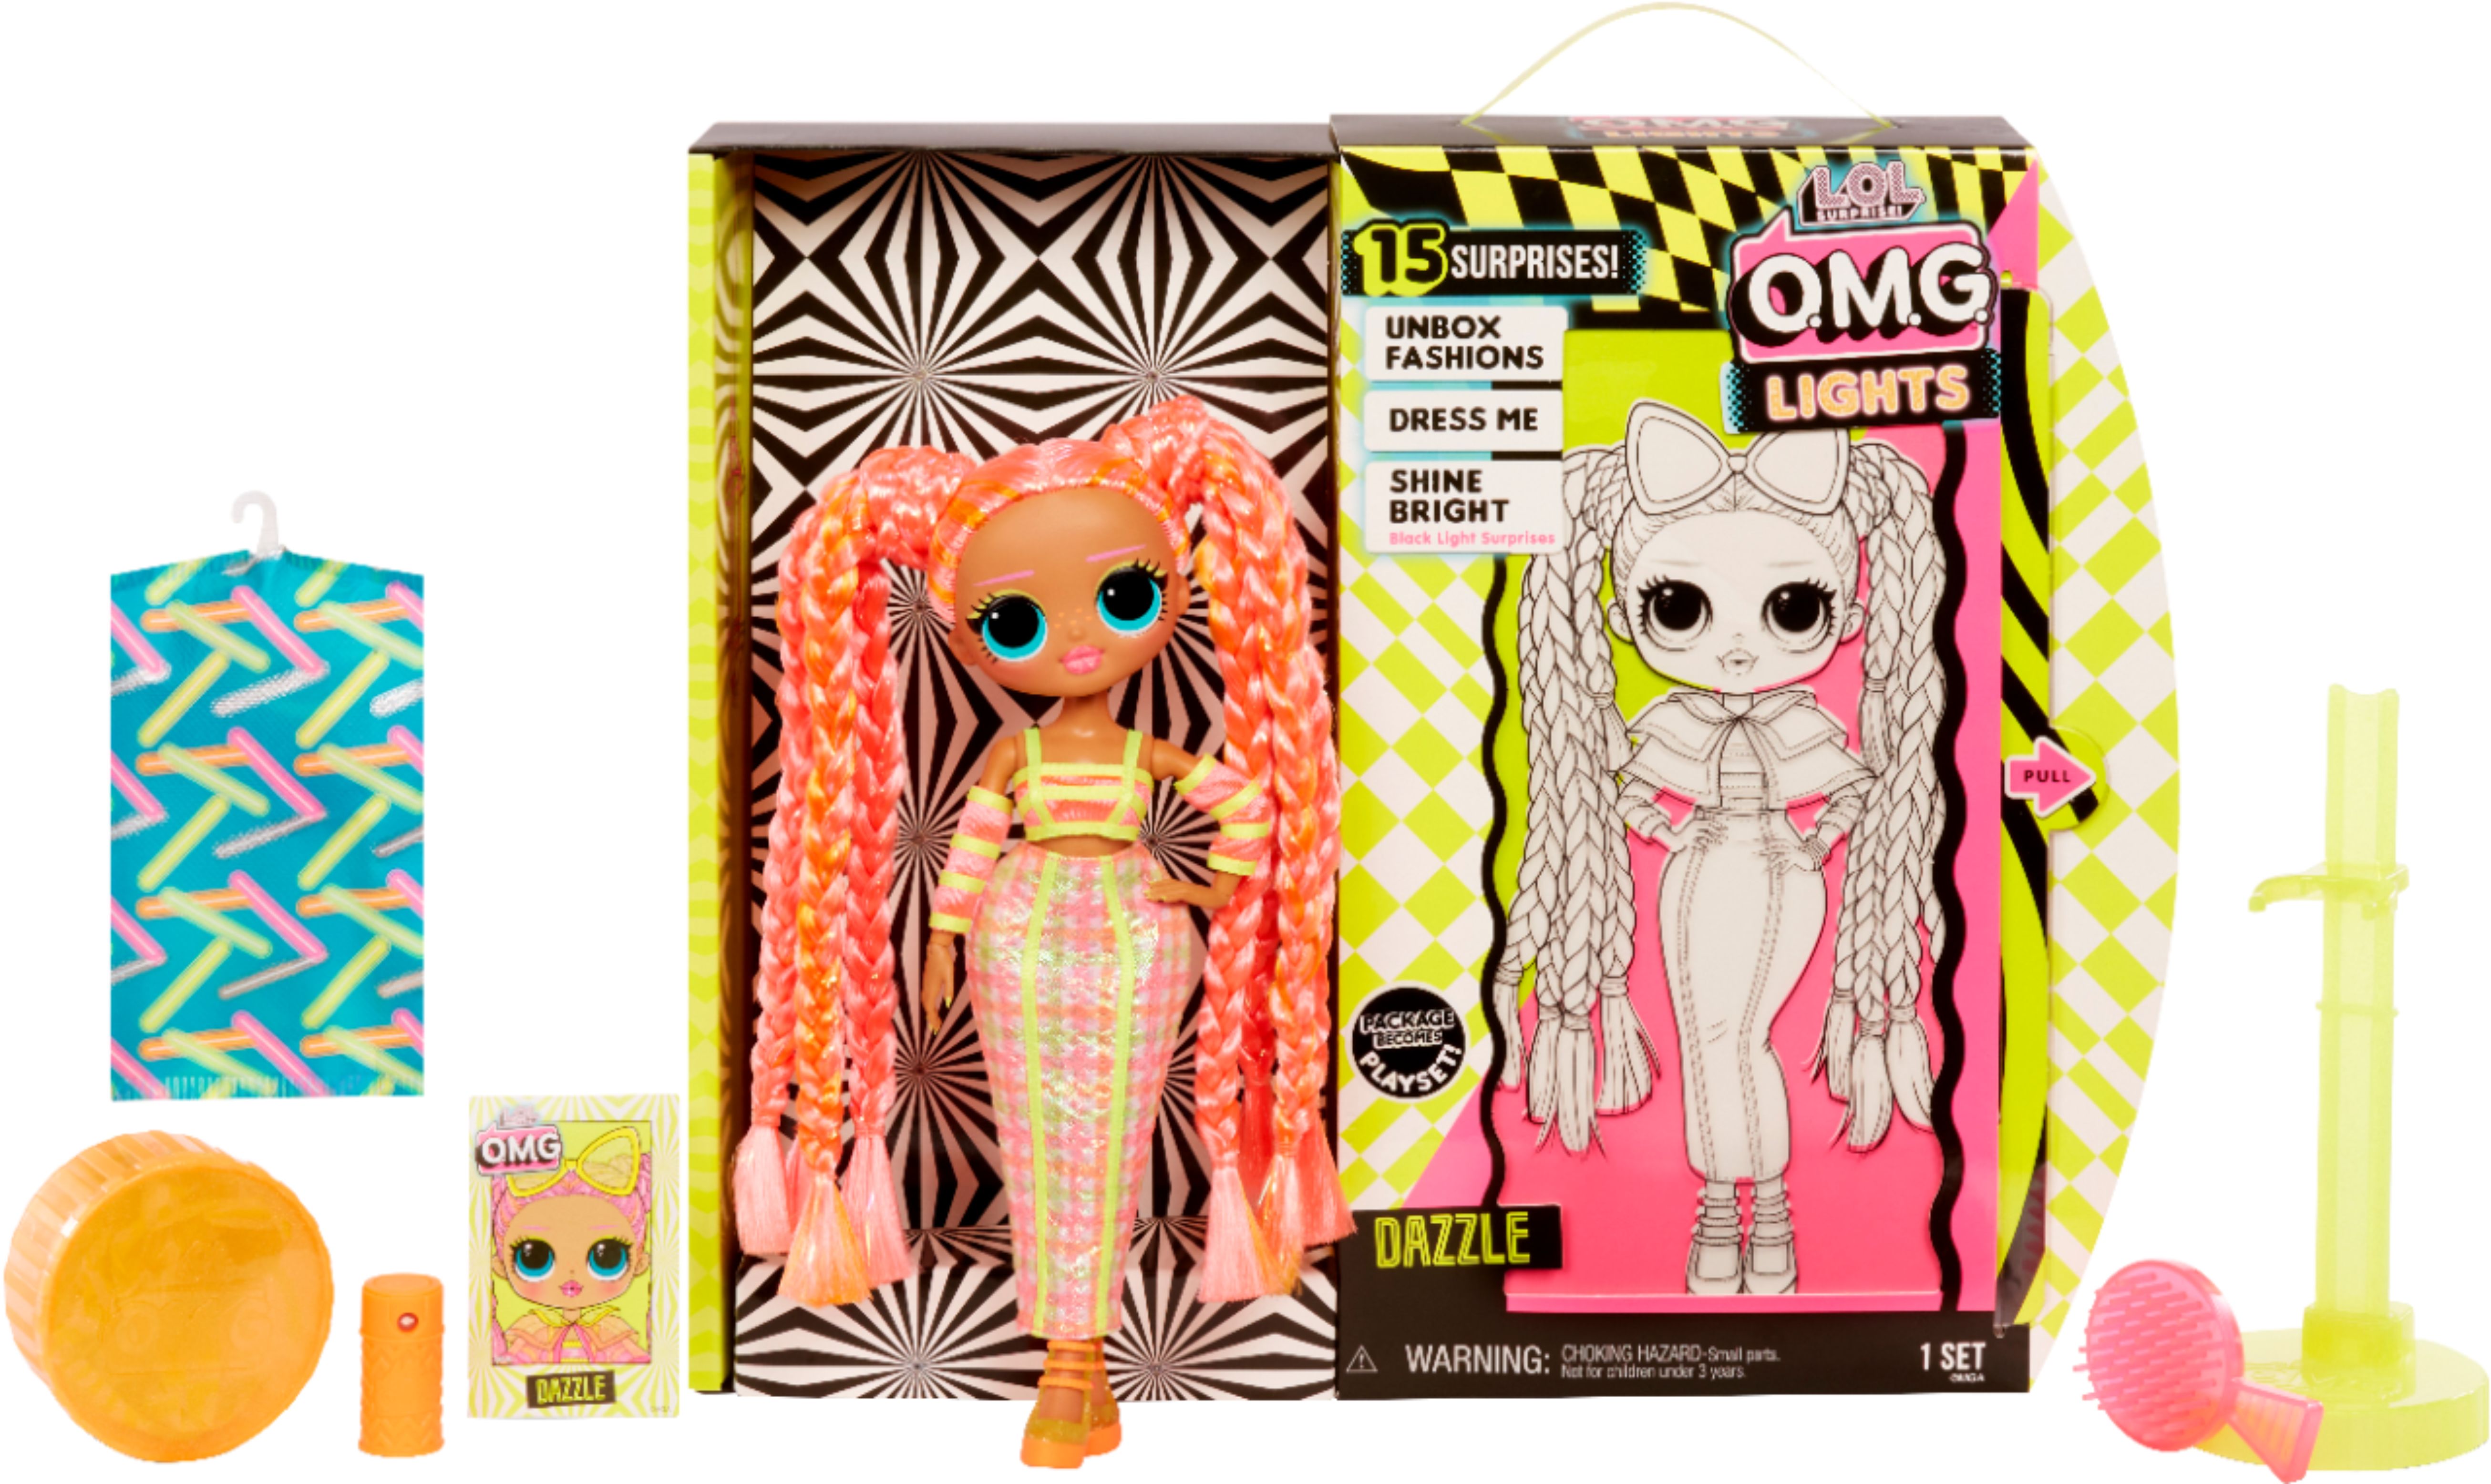 L.O.L. Surprise! O.M.G. Lights Groovy Babe Fashion Doll with 15 Surprises - wide 3